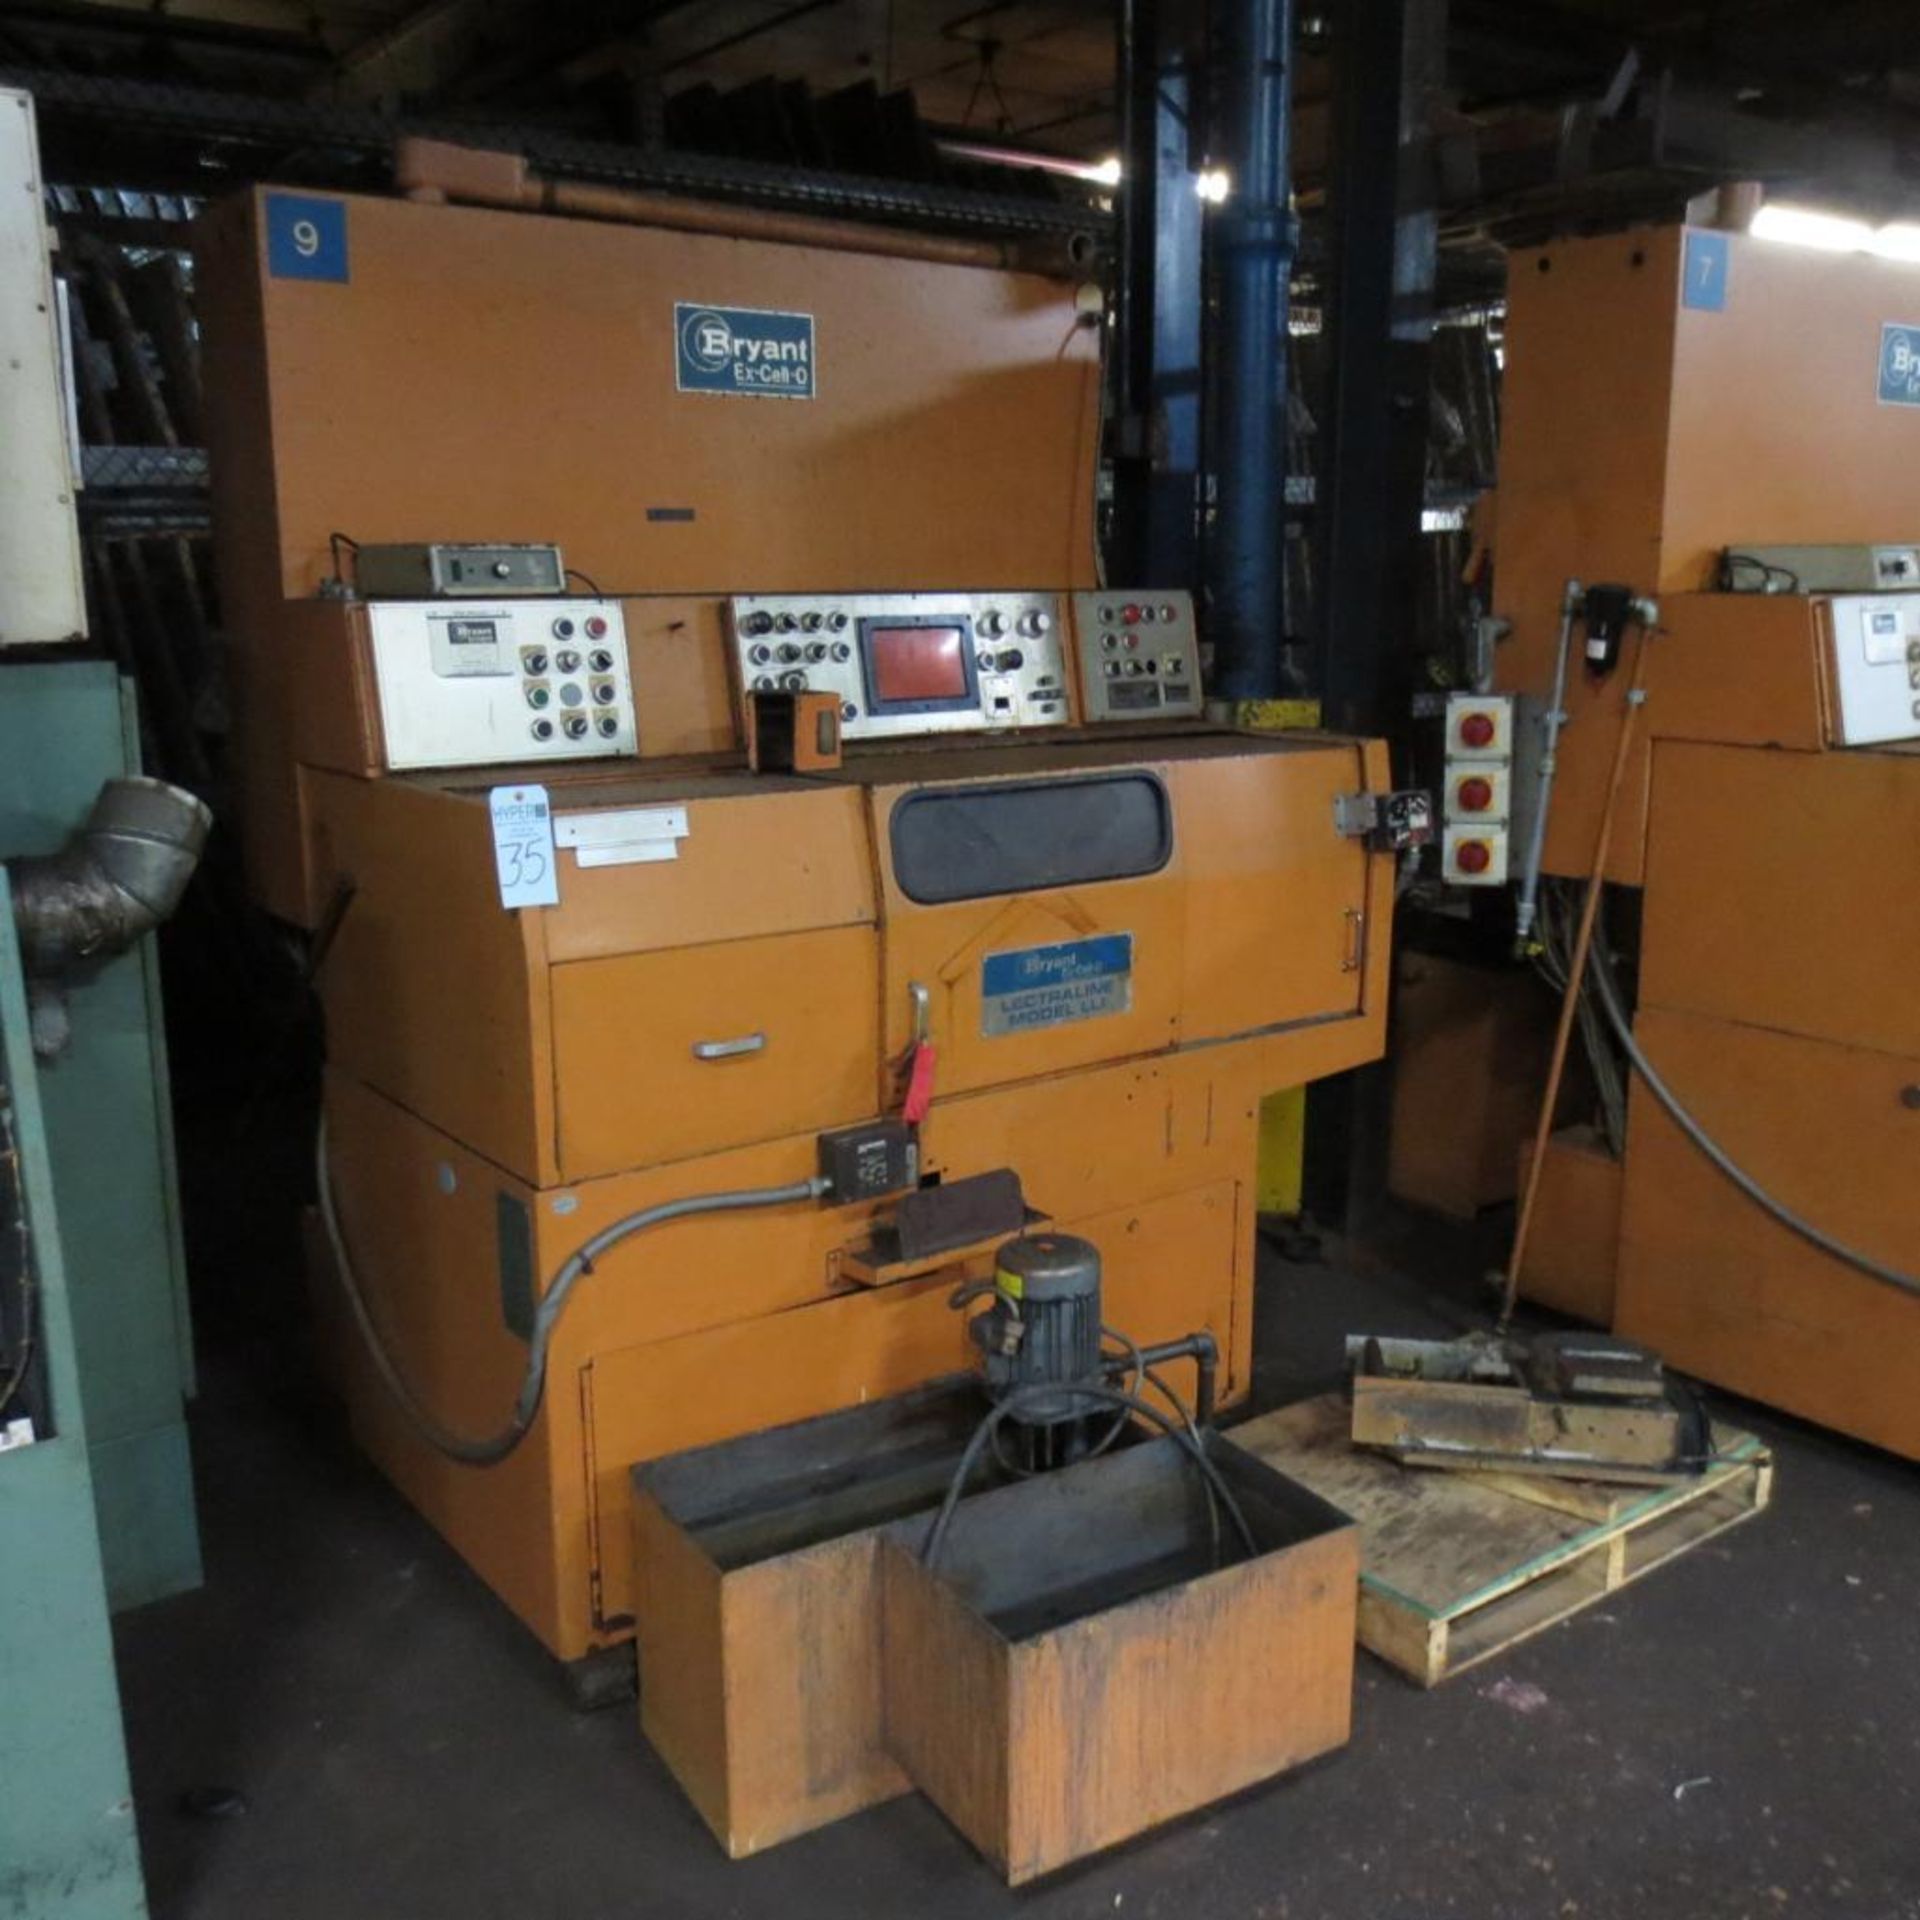 Bryant EX-Cell-0 LL1 CNC Grinder, S/N W-16891. Loading Fee is $350.00